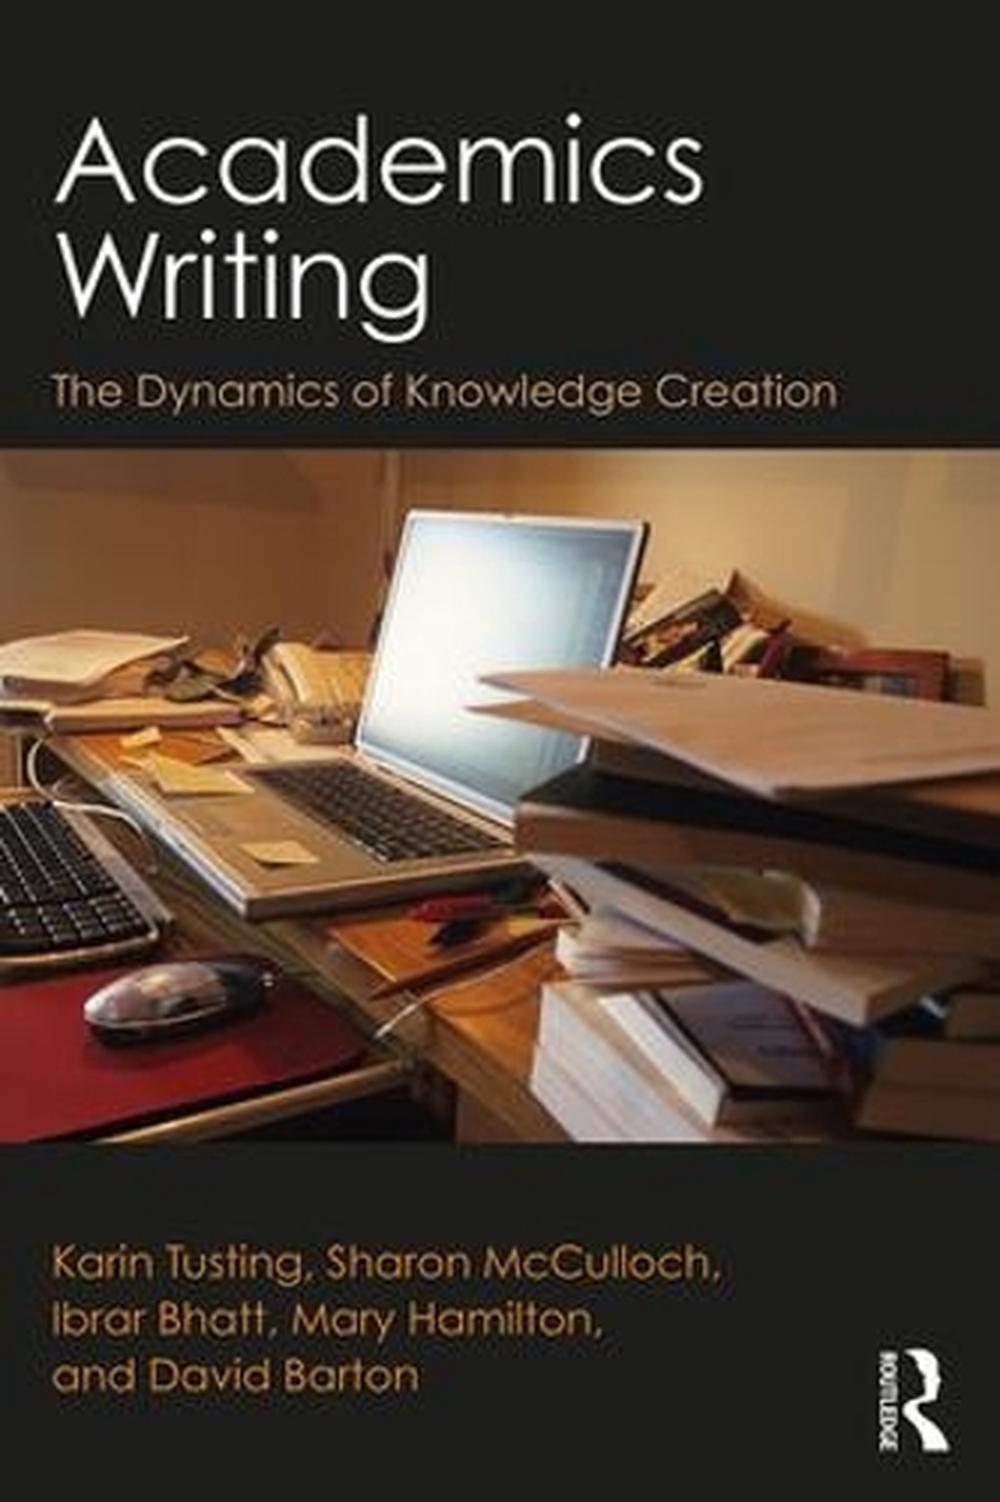 Academics Writing: The Dynamics of Knowledge Creation by Karin Tusting (English)